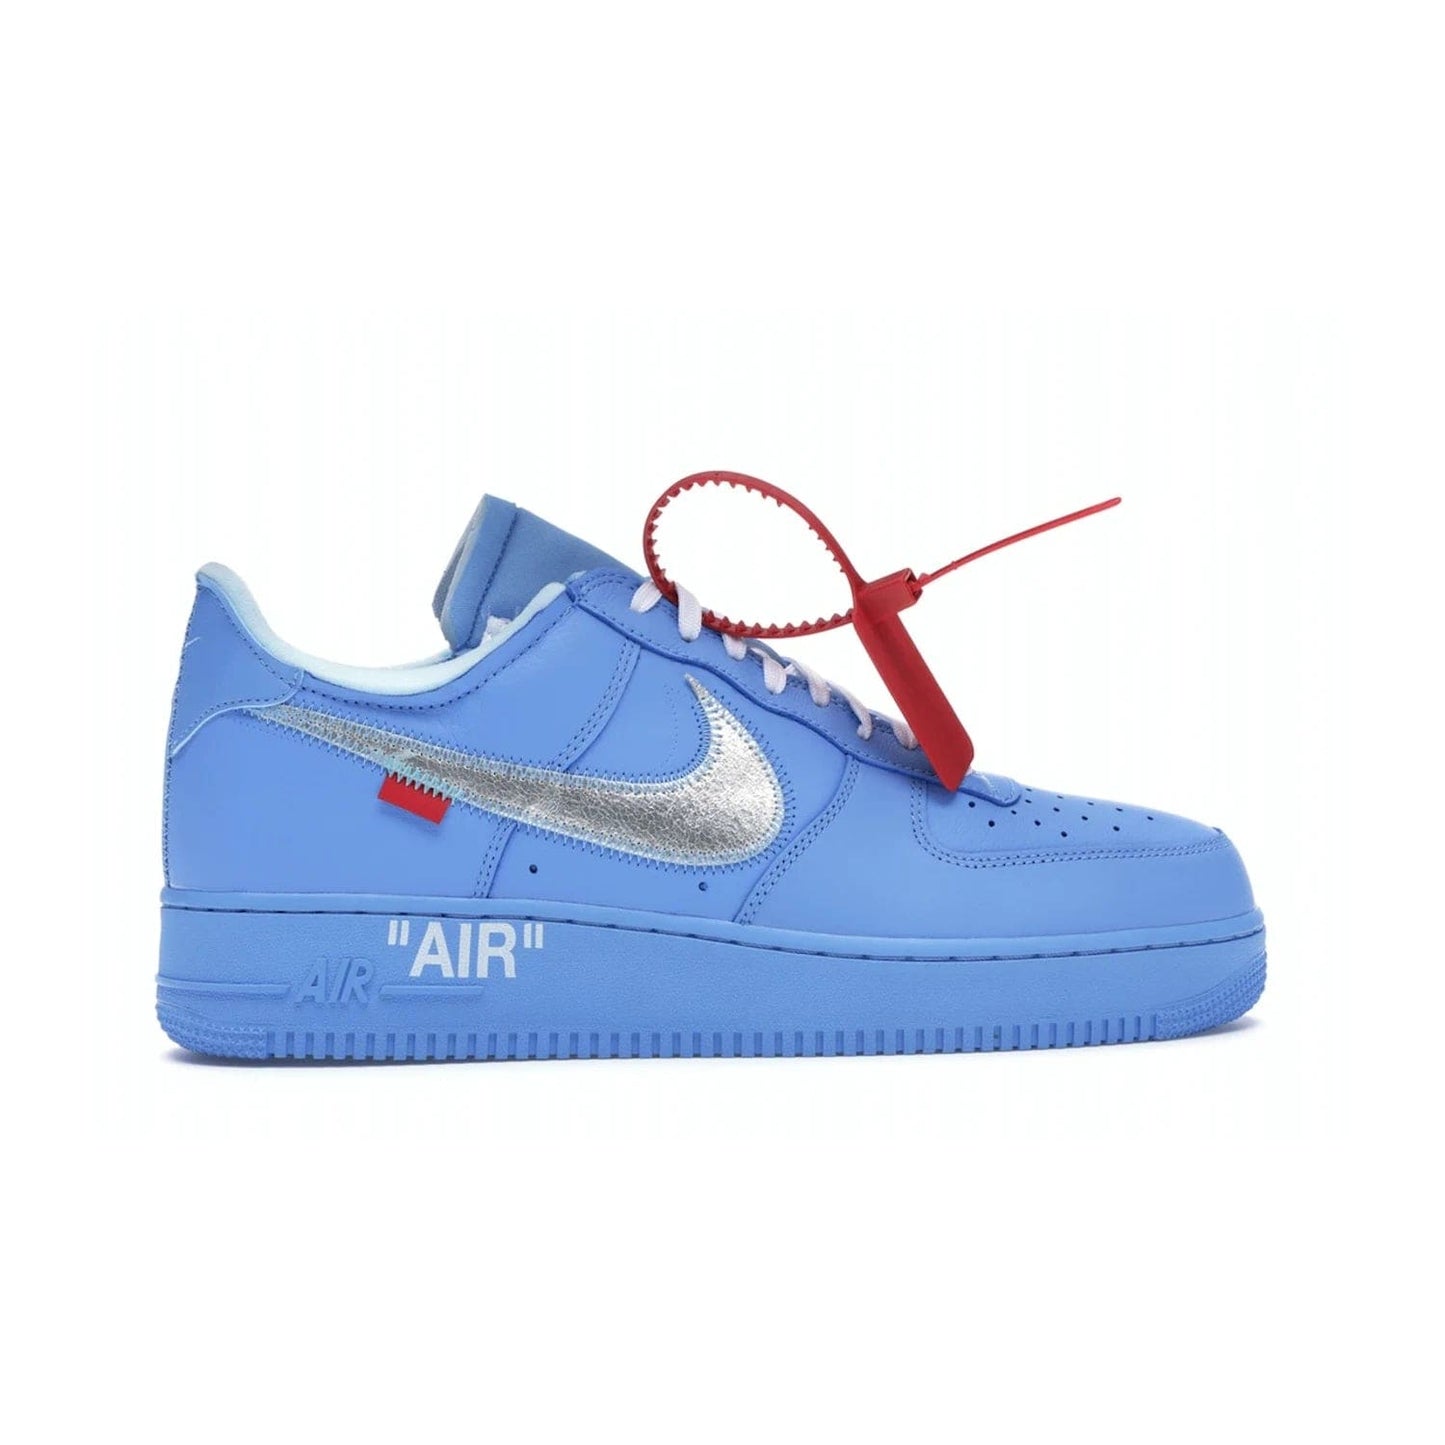 Nike Air Force 1 Low Off-White MCA University Blue - Image 36 - Only at www.BallersClubKickz.com - Virgil Abloh's Air Force 1 Low Off-White MCA University Blue: Features University Blue leather and midsole, reflective silver Nike Swoosh, red zip tie, white laces, and iconic Off-White™ branding. A must-have for any Virgil Abloh enthusiast.